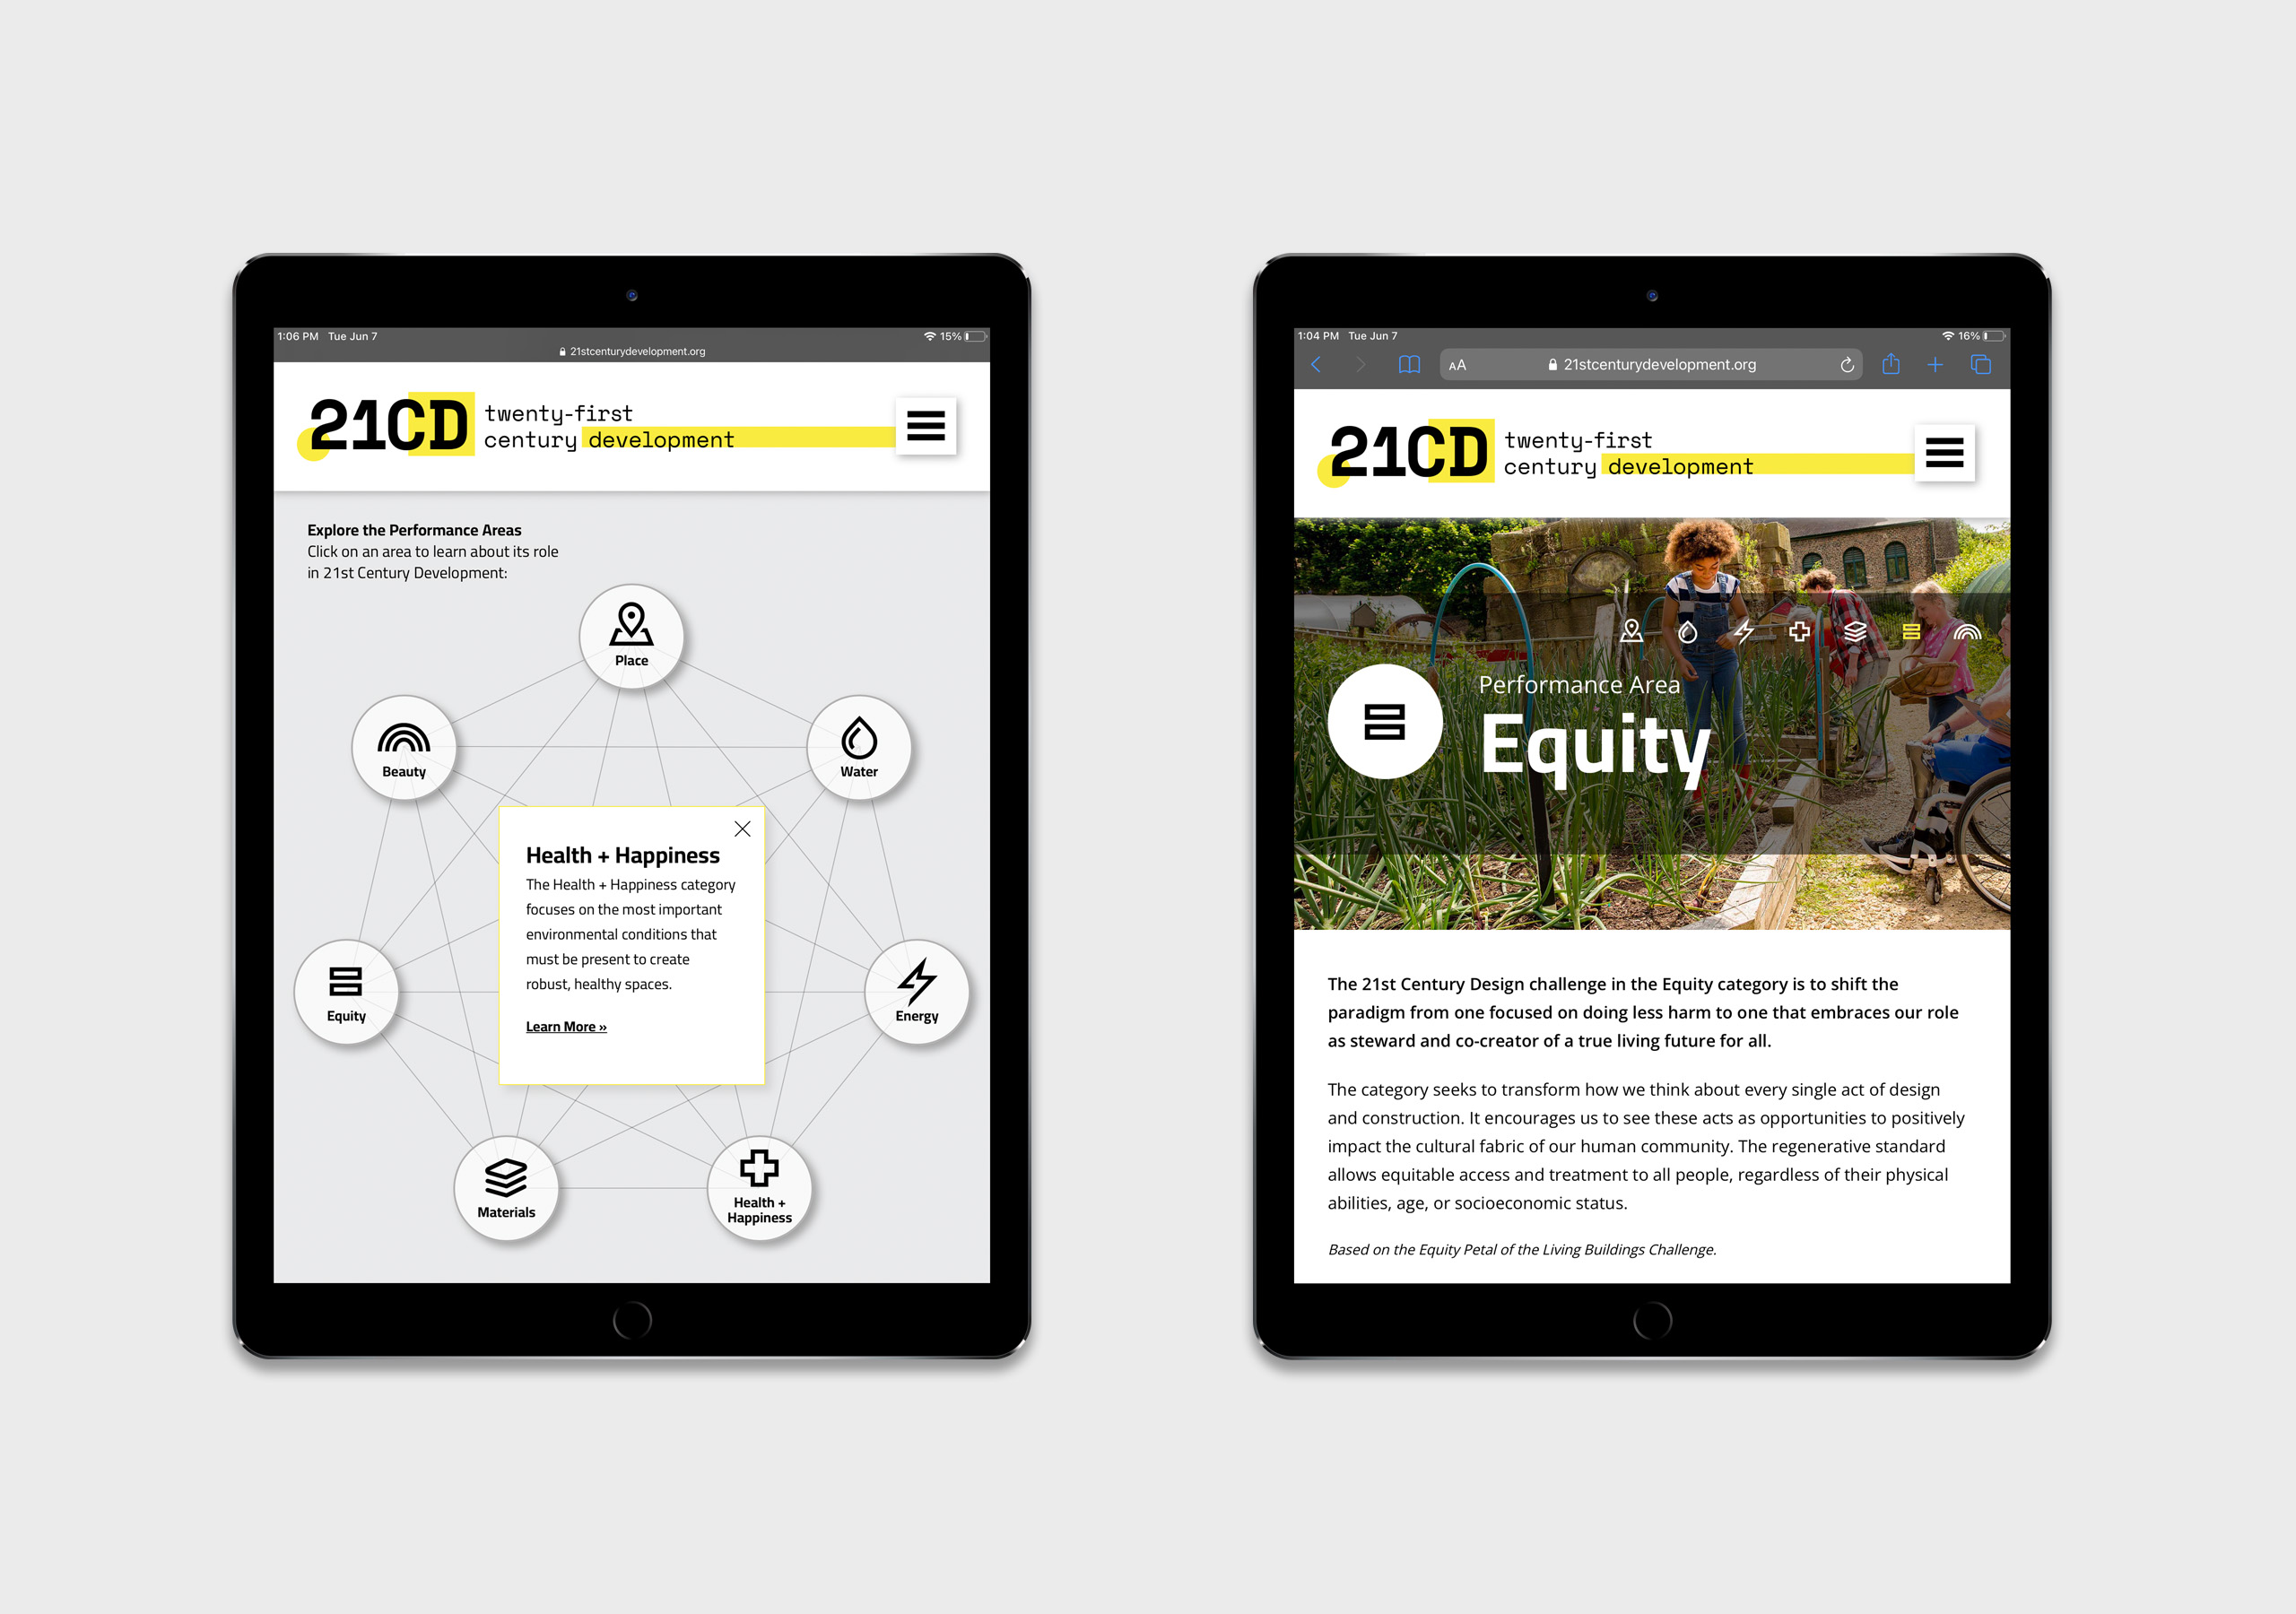 21st Century Design website pages shown on two ipads